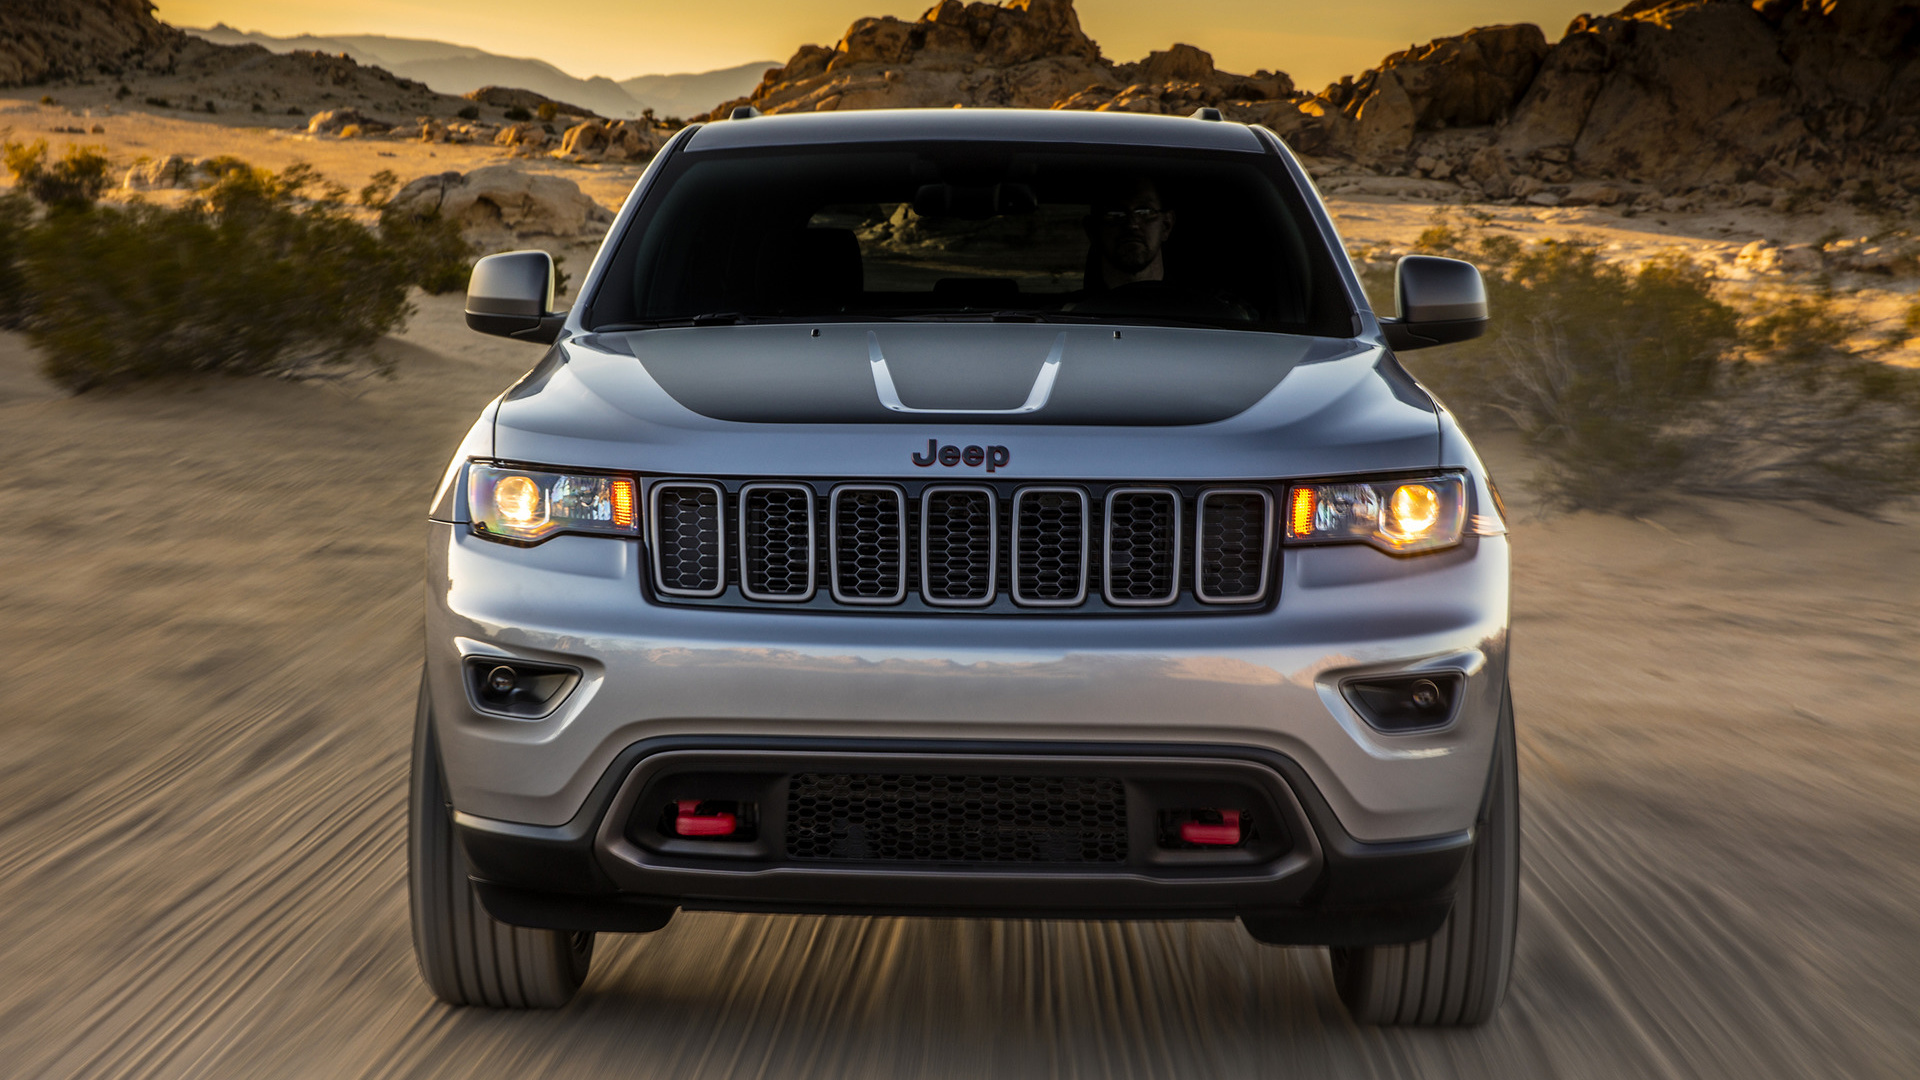 2017 Jeep Grand Cherokee Trailhawk - Wallpapers and HD Images | Car Pixel